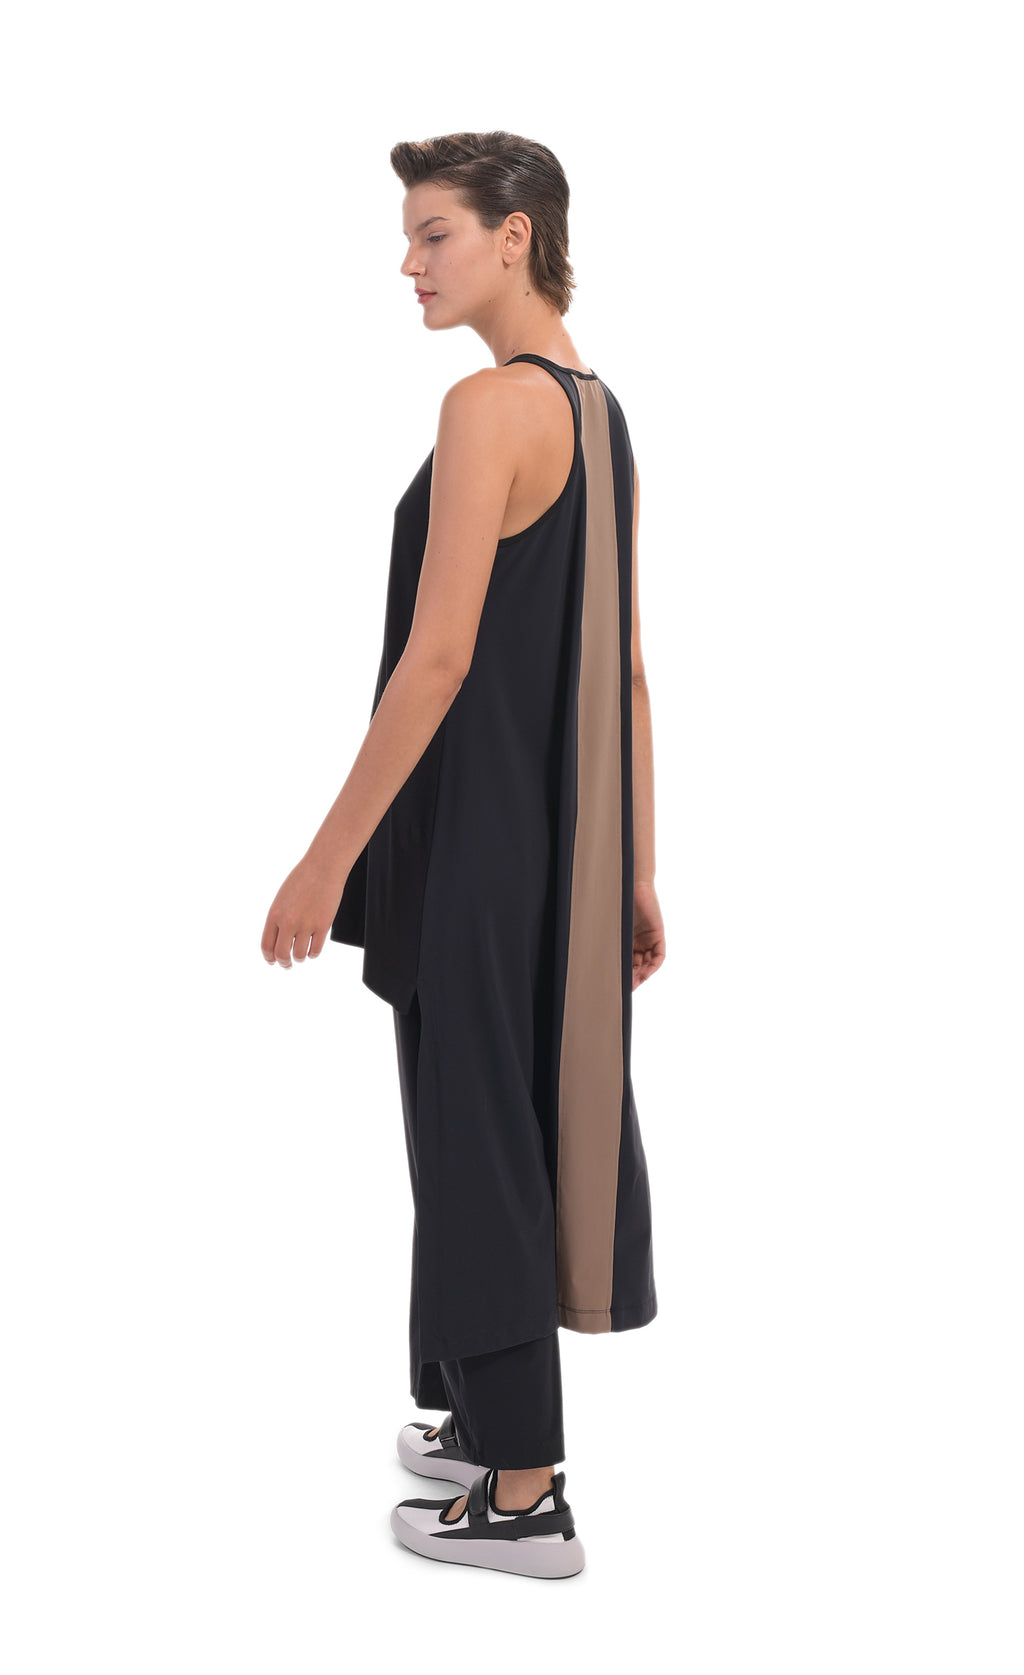 Left, back full body view of a woman wearing the alembika tekbika high low top with the alembika tekbika riding pant. The black top is sleeveless with a t-back. The back of the top has a large brown panel running down the center and comes down to just above the ankles. 